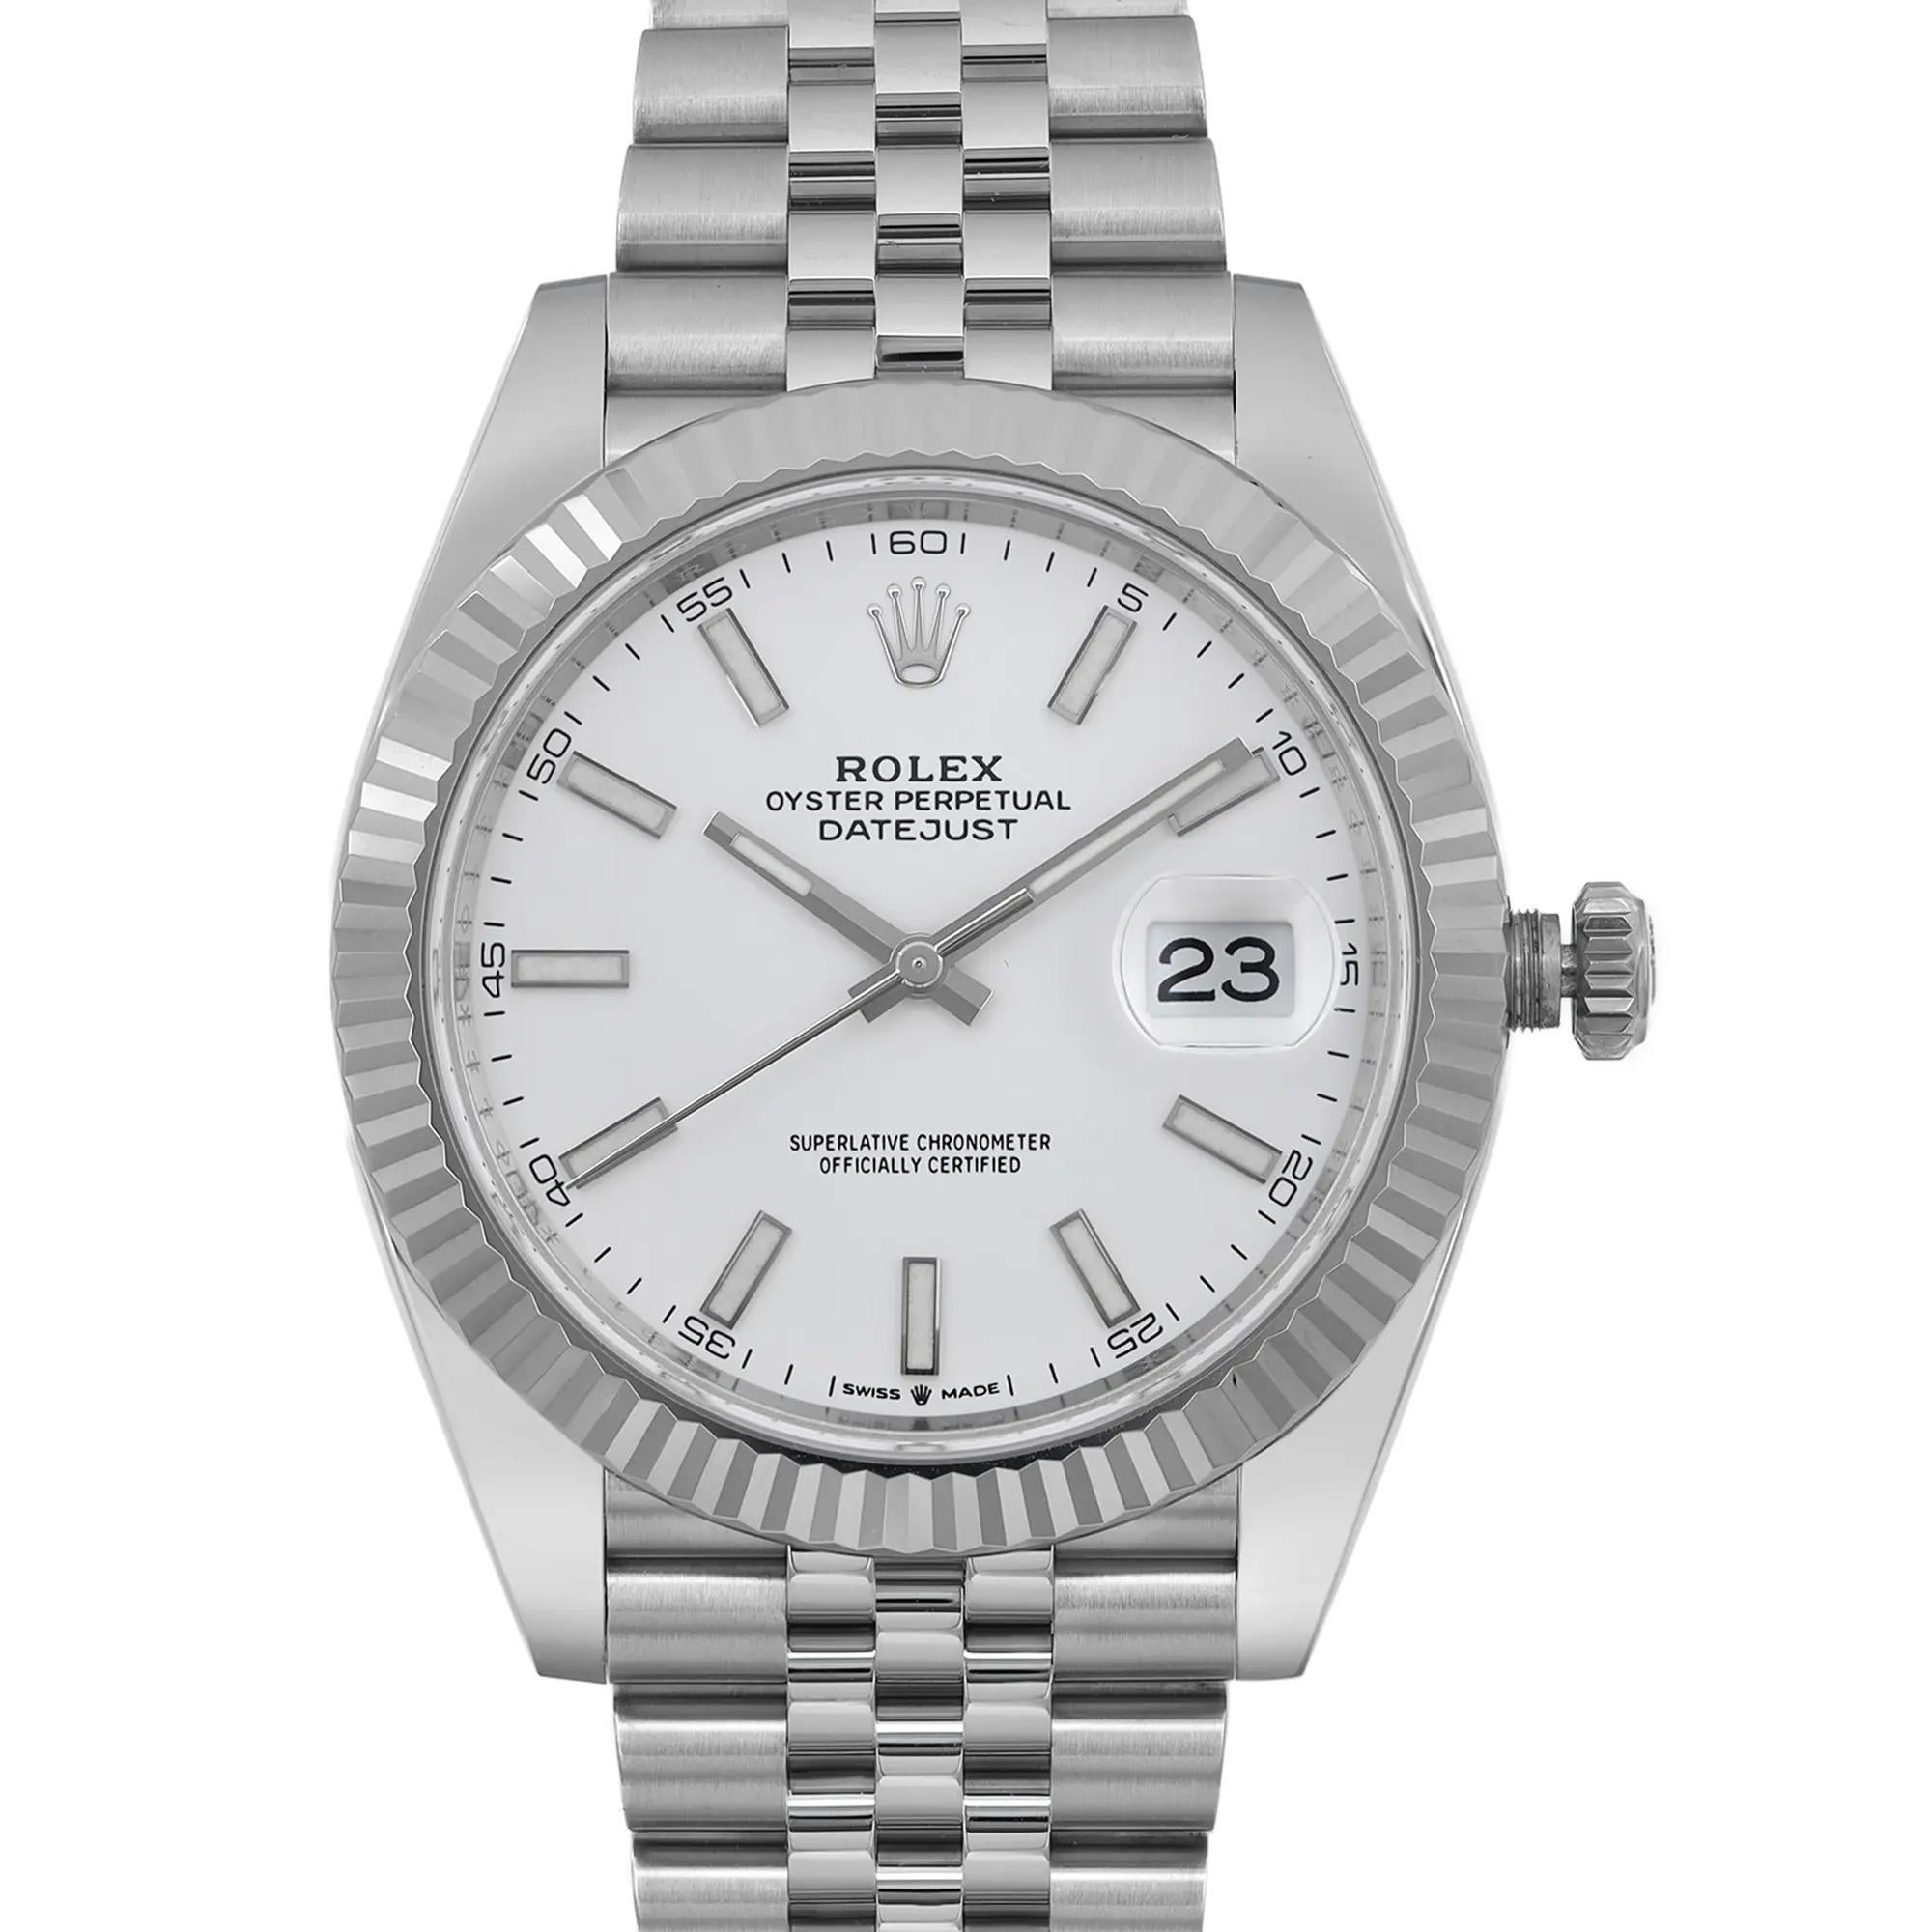 New watch. Comes with the original box and papers.

General Information
Brand: Rolex
Model: Datejust 126334
Type: Wristwatch
Department: Men
Style: Luxury
Vintage: No
Country/Region of Manufacture: Switzerland
Year Manufactured: 2023
Handedness: